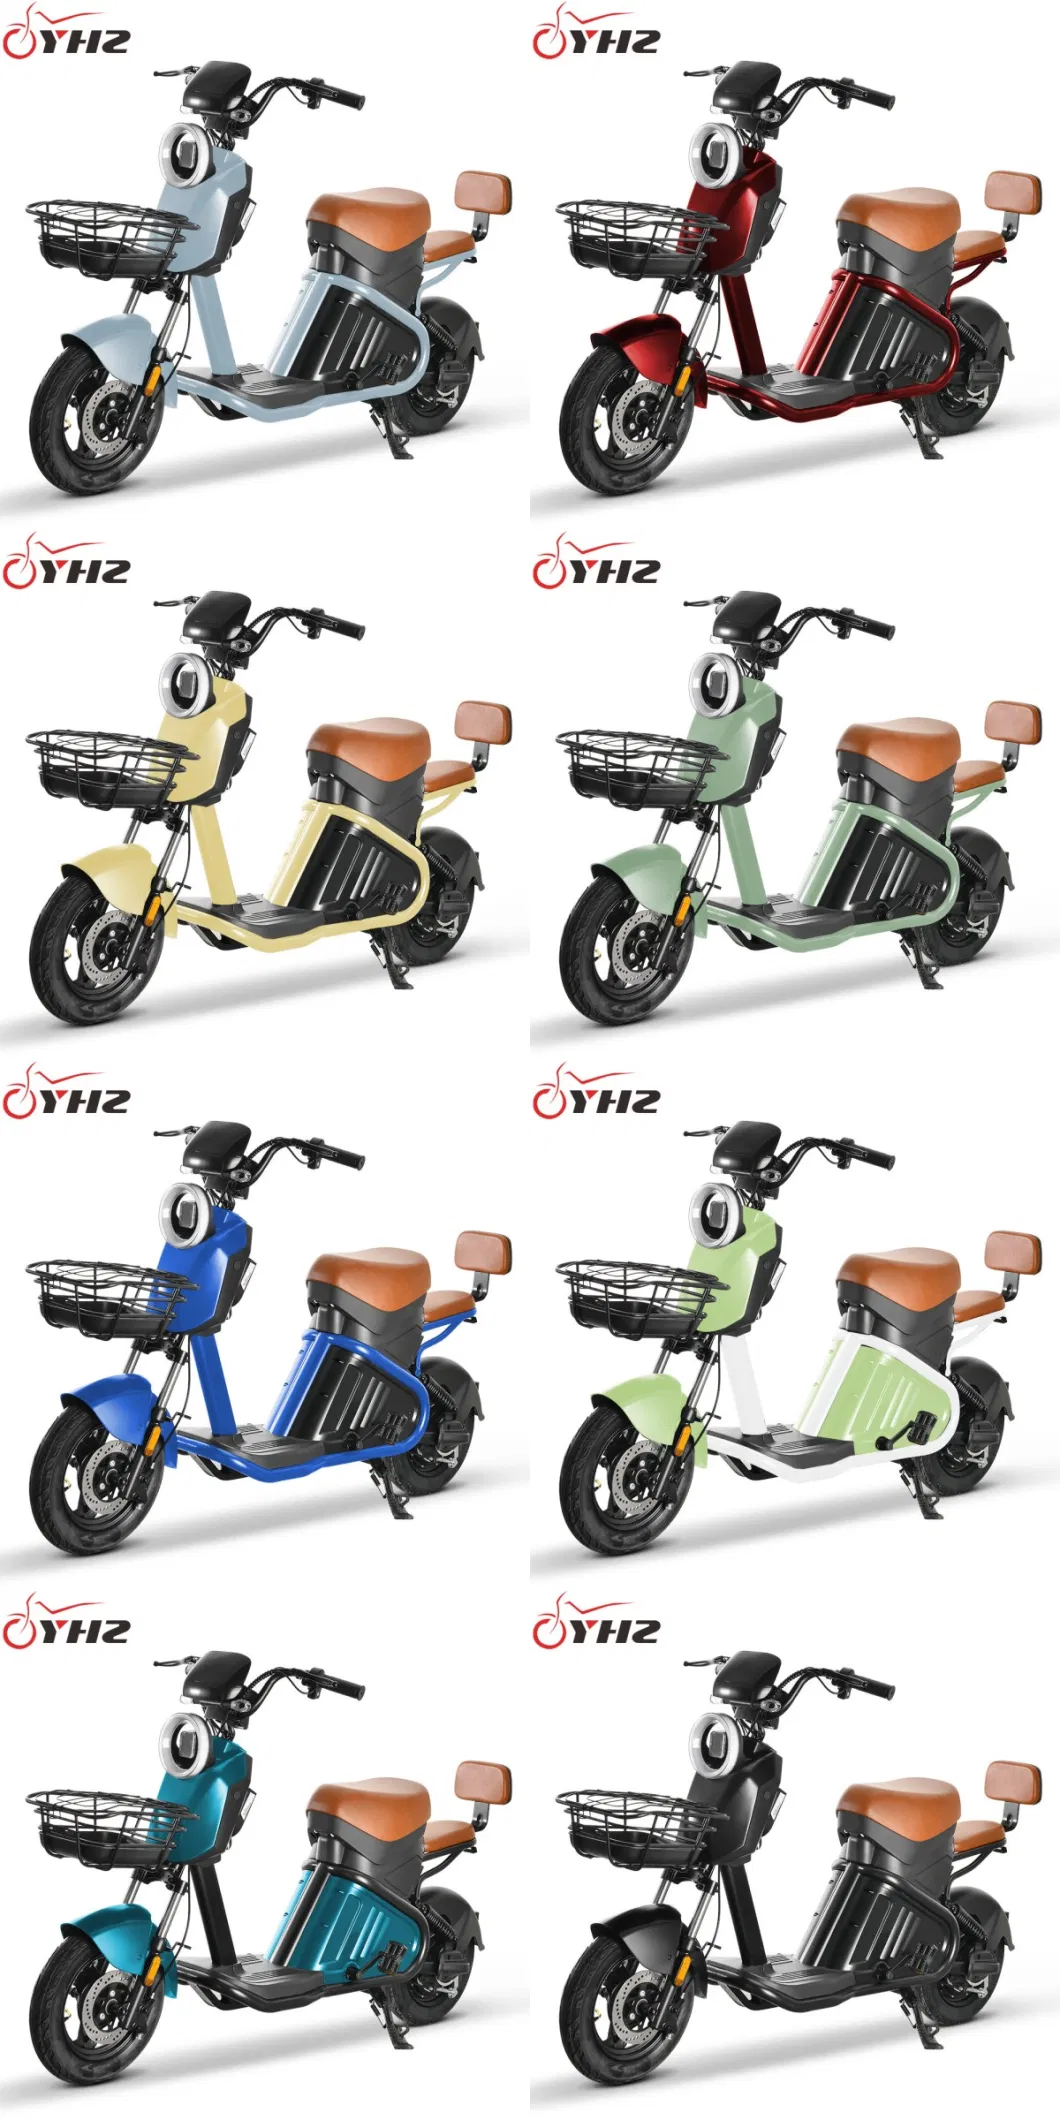 EU 500W 1000W Dual Seater Battery Optional Moped Scooter Electric Bicycle Bike